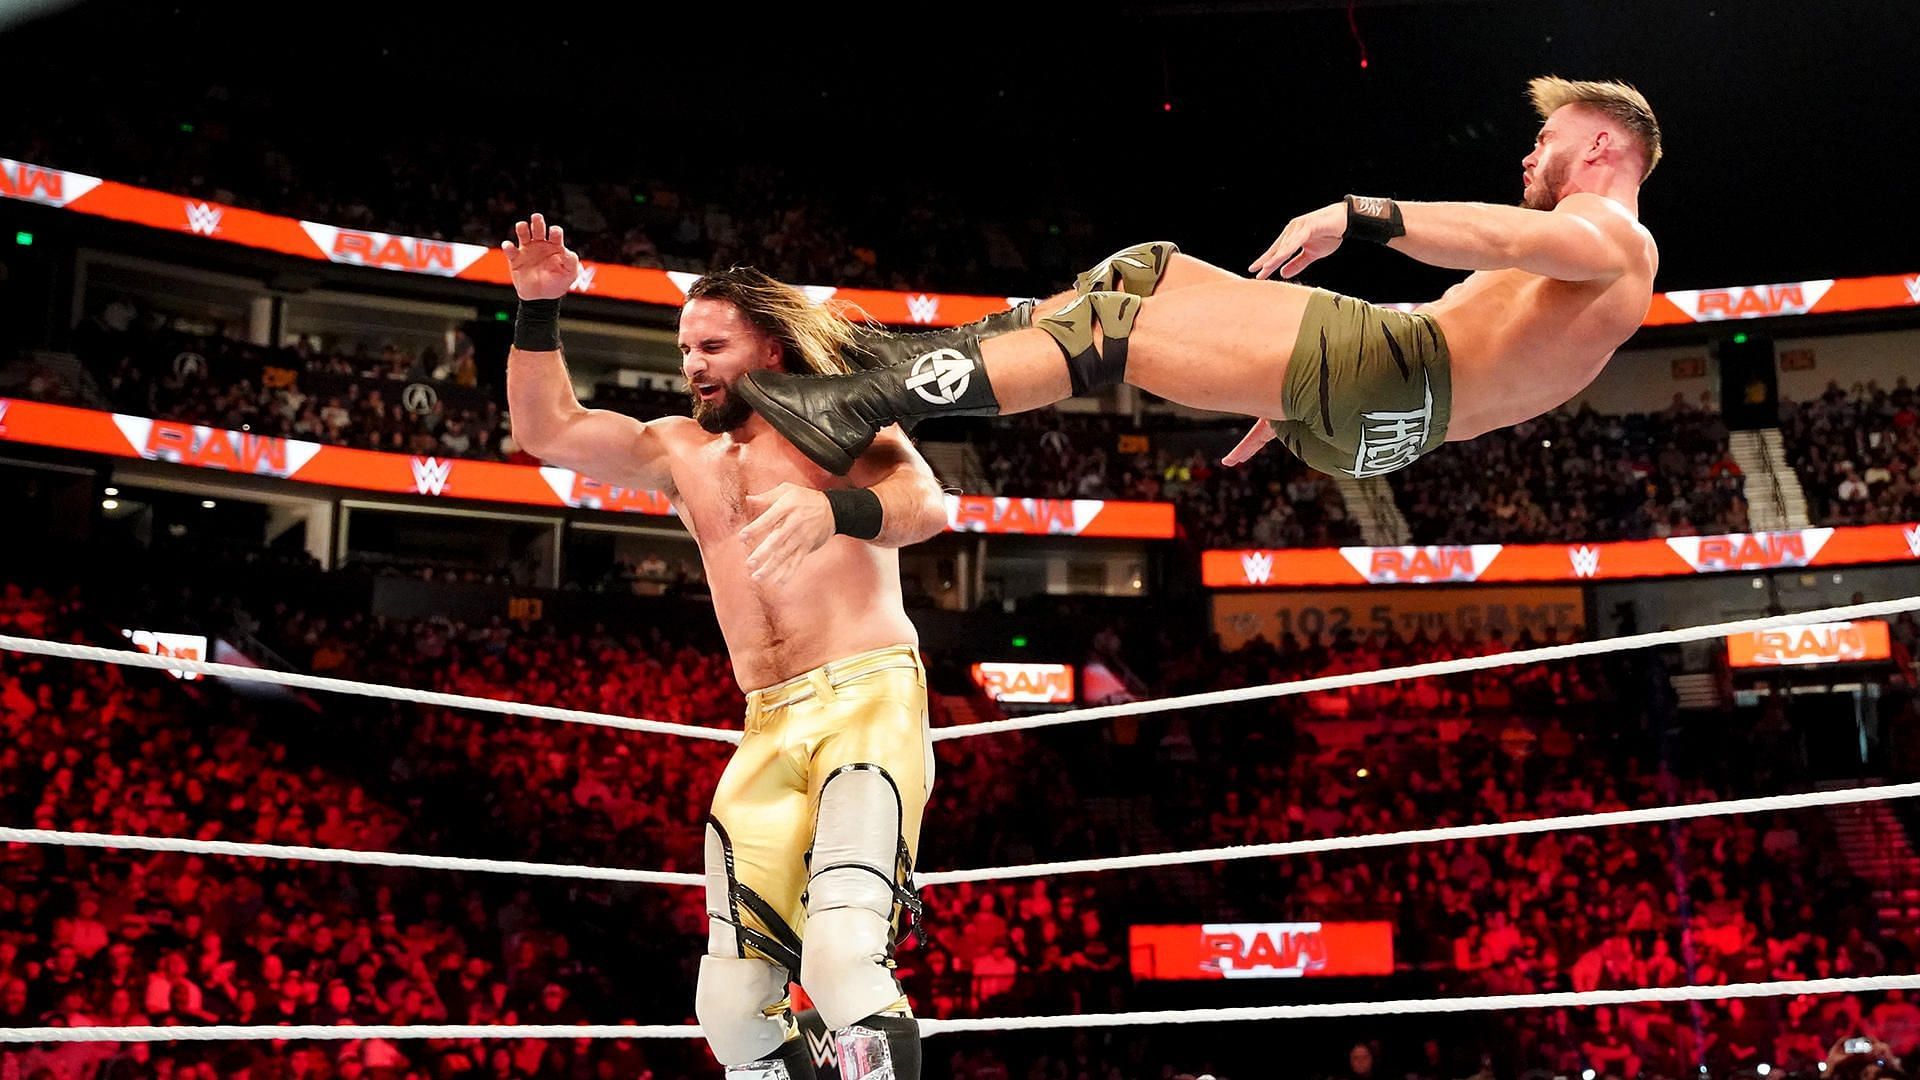 Seth Rollins couldn't undo the Austin theory.